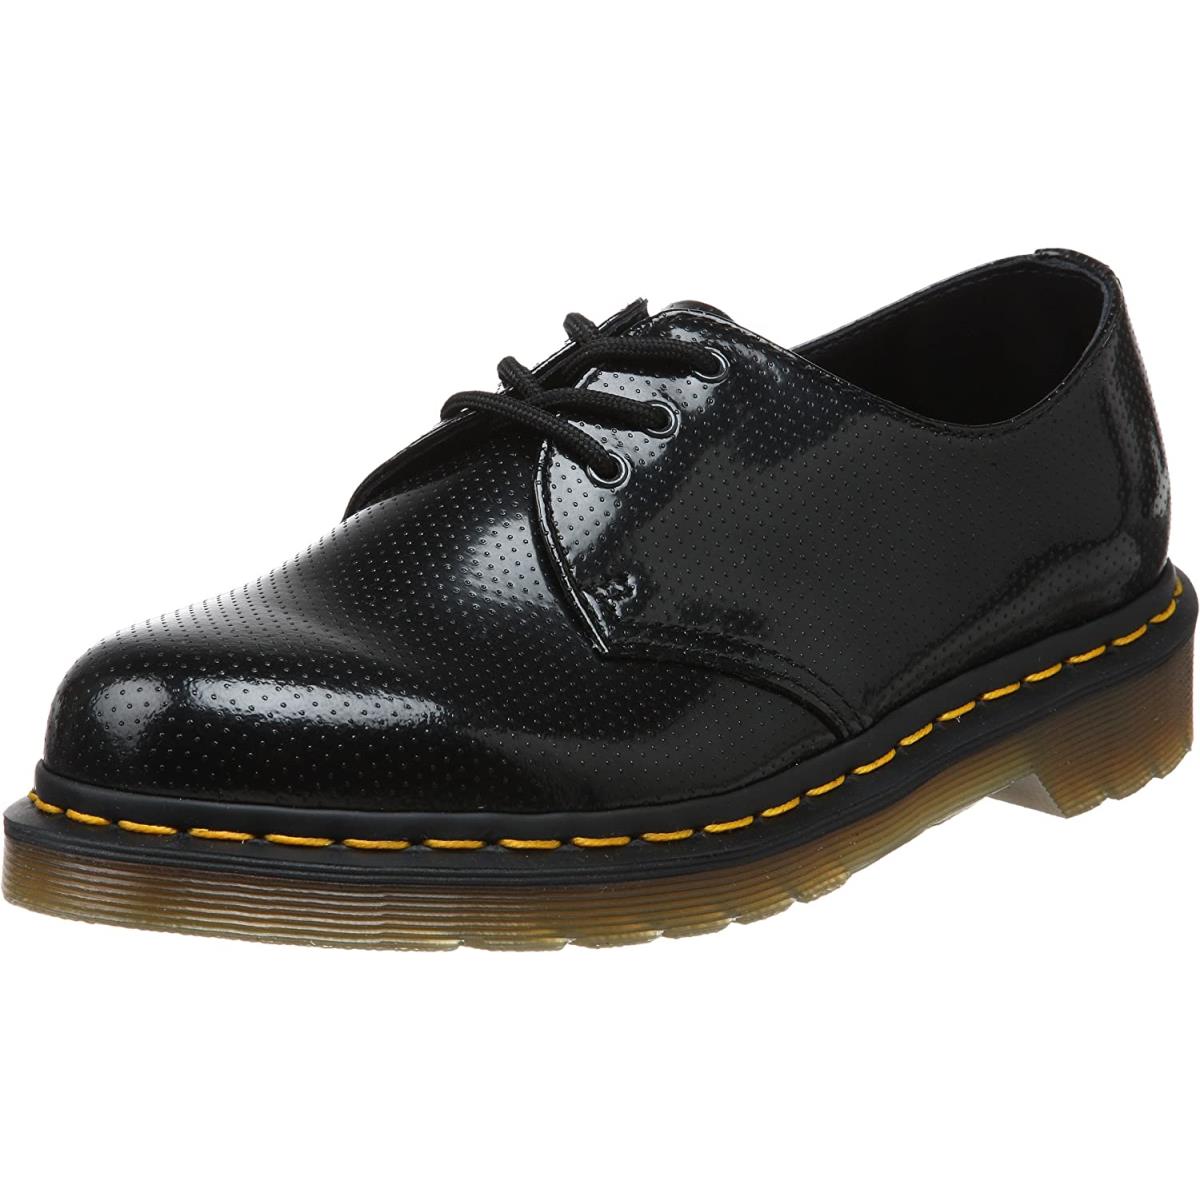 Dr. Martens 1461 3-Eye Leather Oxford Shoe For Men and Women Black